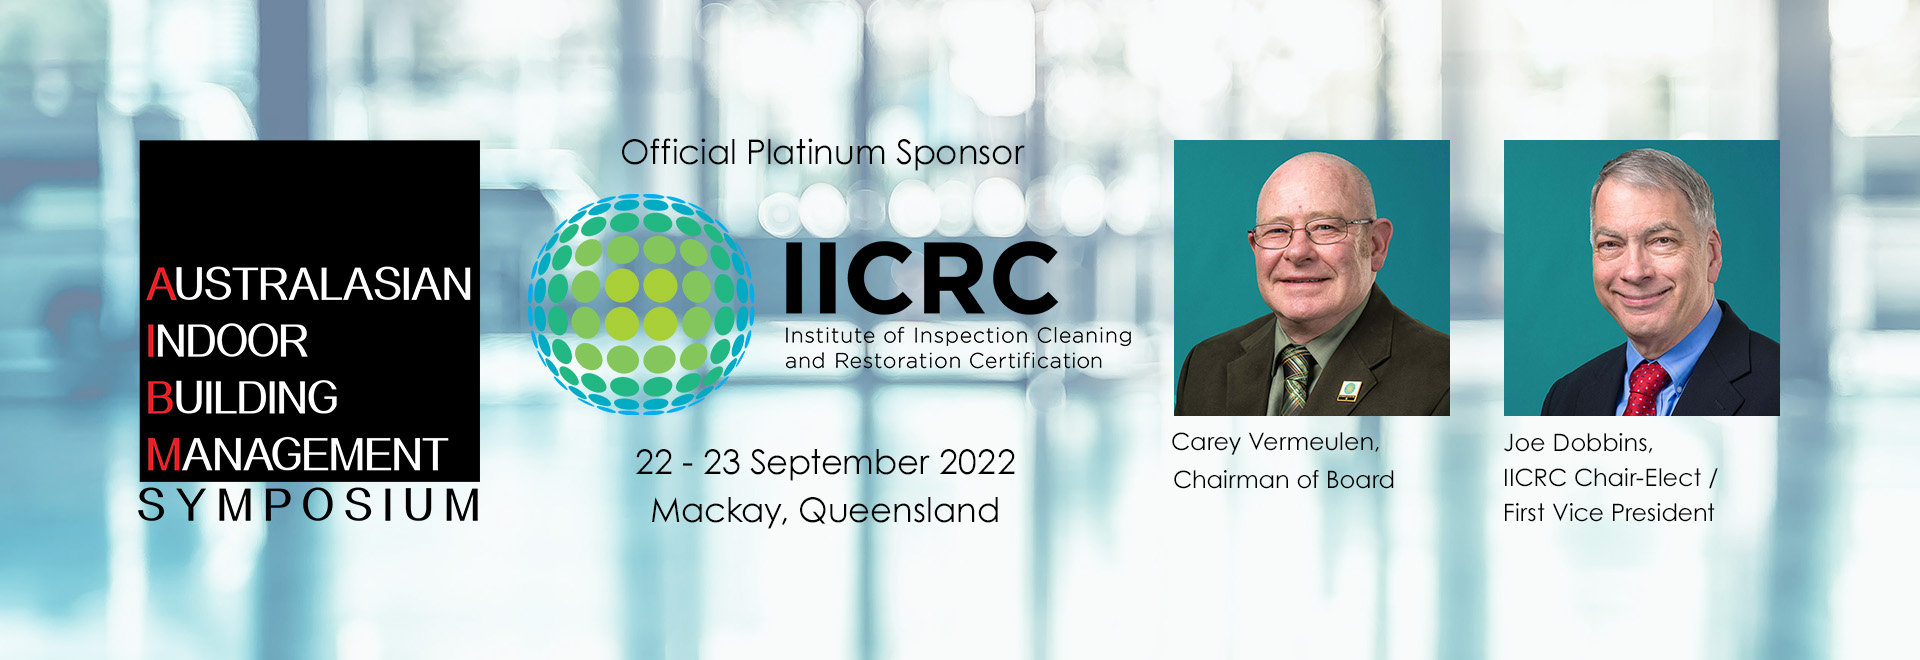 IICRC Official Platinum Sponsor of the AIBMS 